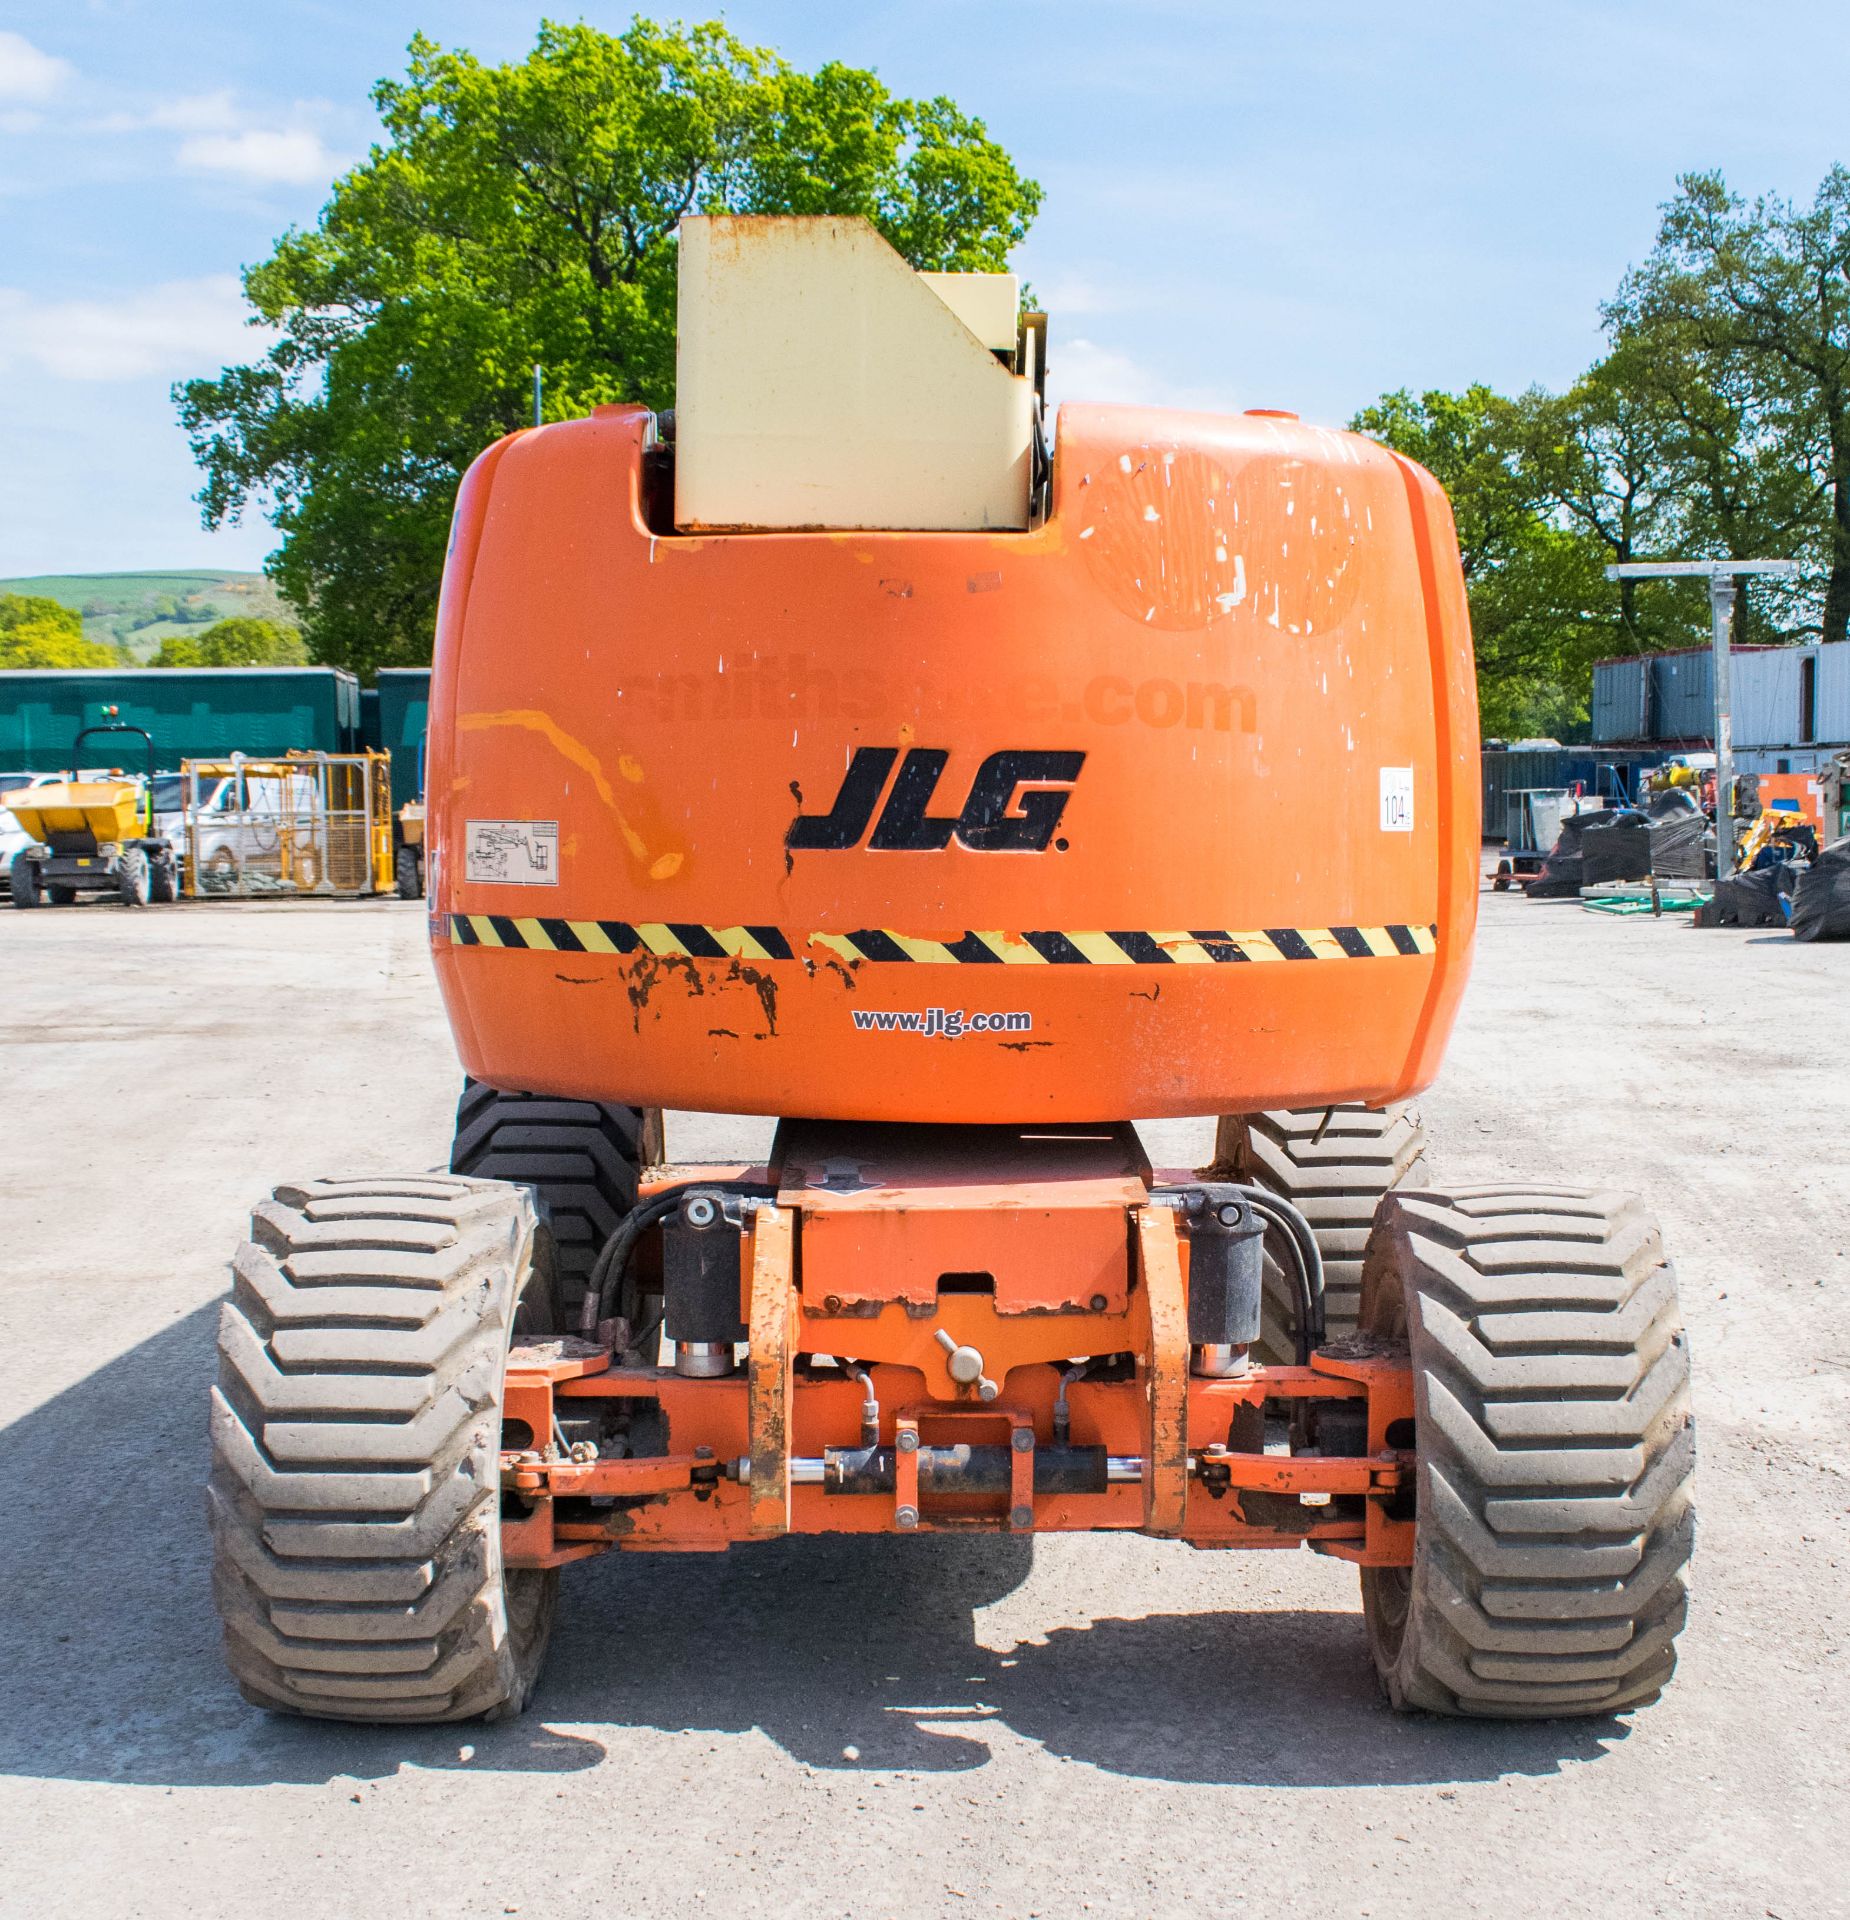 JLG 450 AJ 45 foot 4 wheel drive articulated boom lift  Year: 2008 S/N: 1300005603 Hours: 2996 - Image 6 of 17